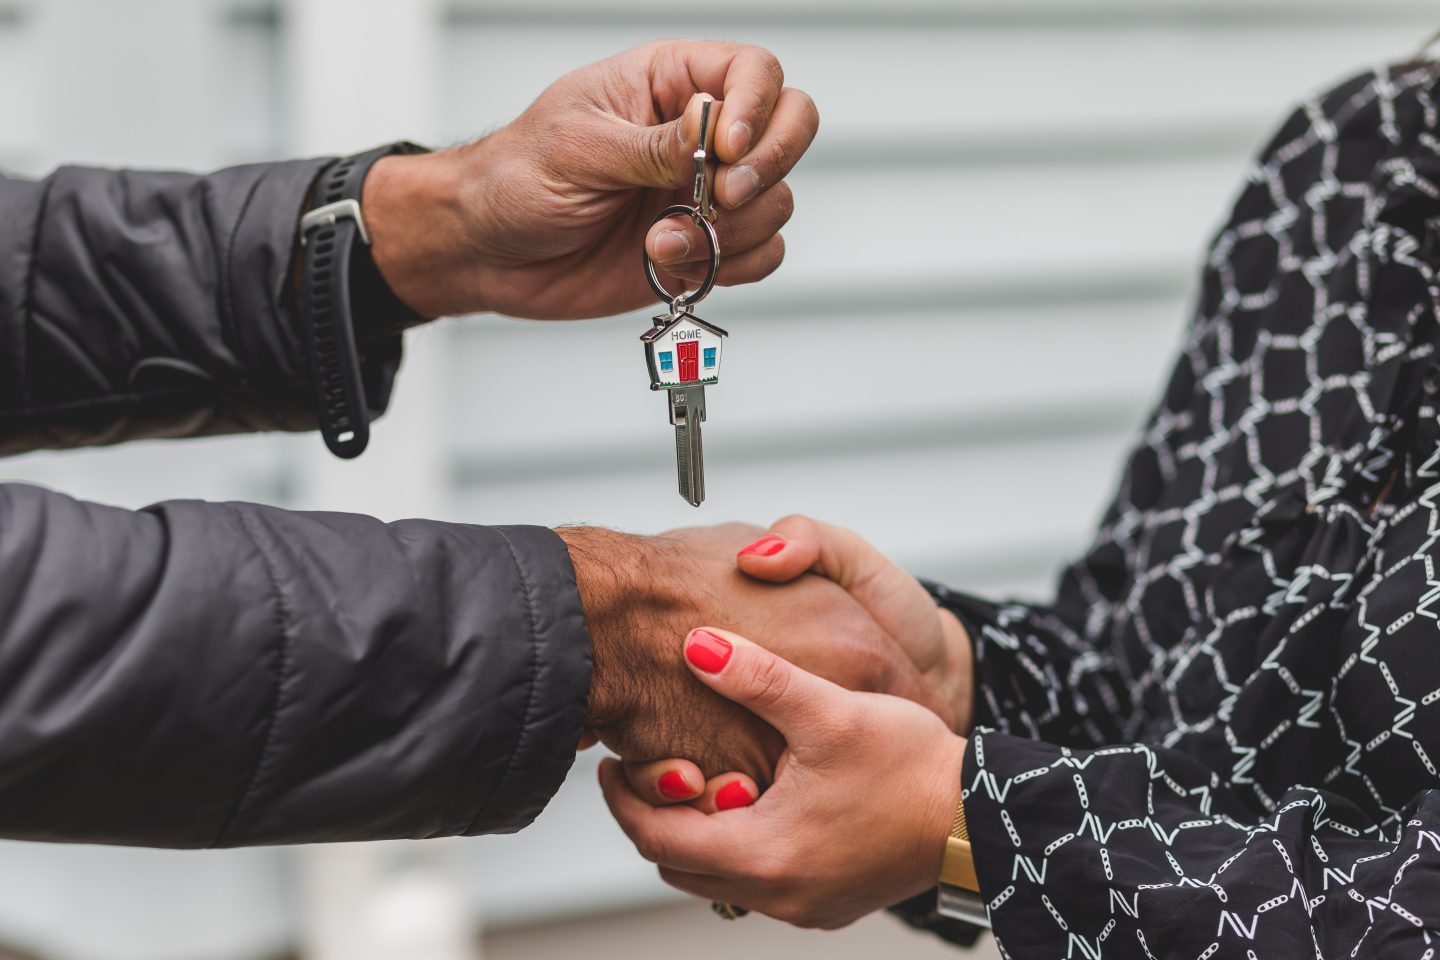 Now That You’ve Bought A New Home, What’s Next?